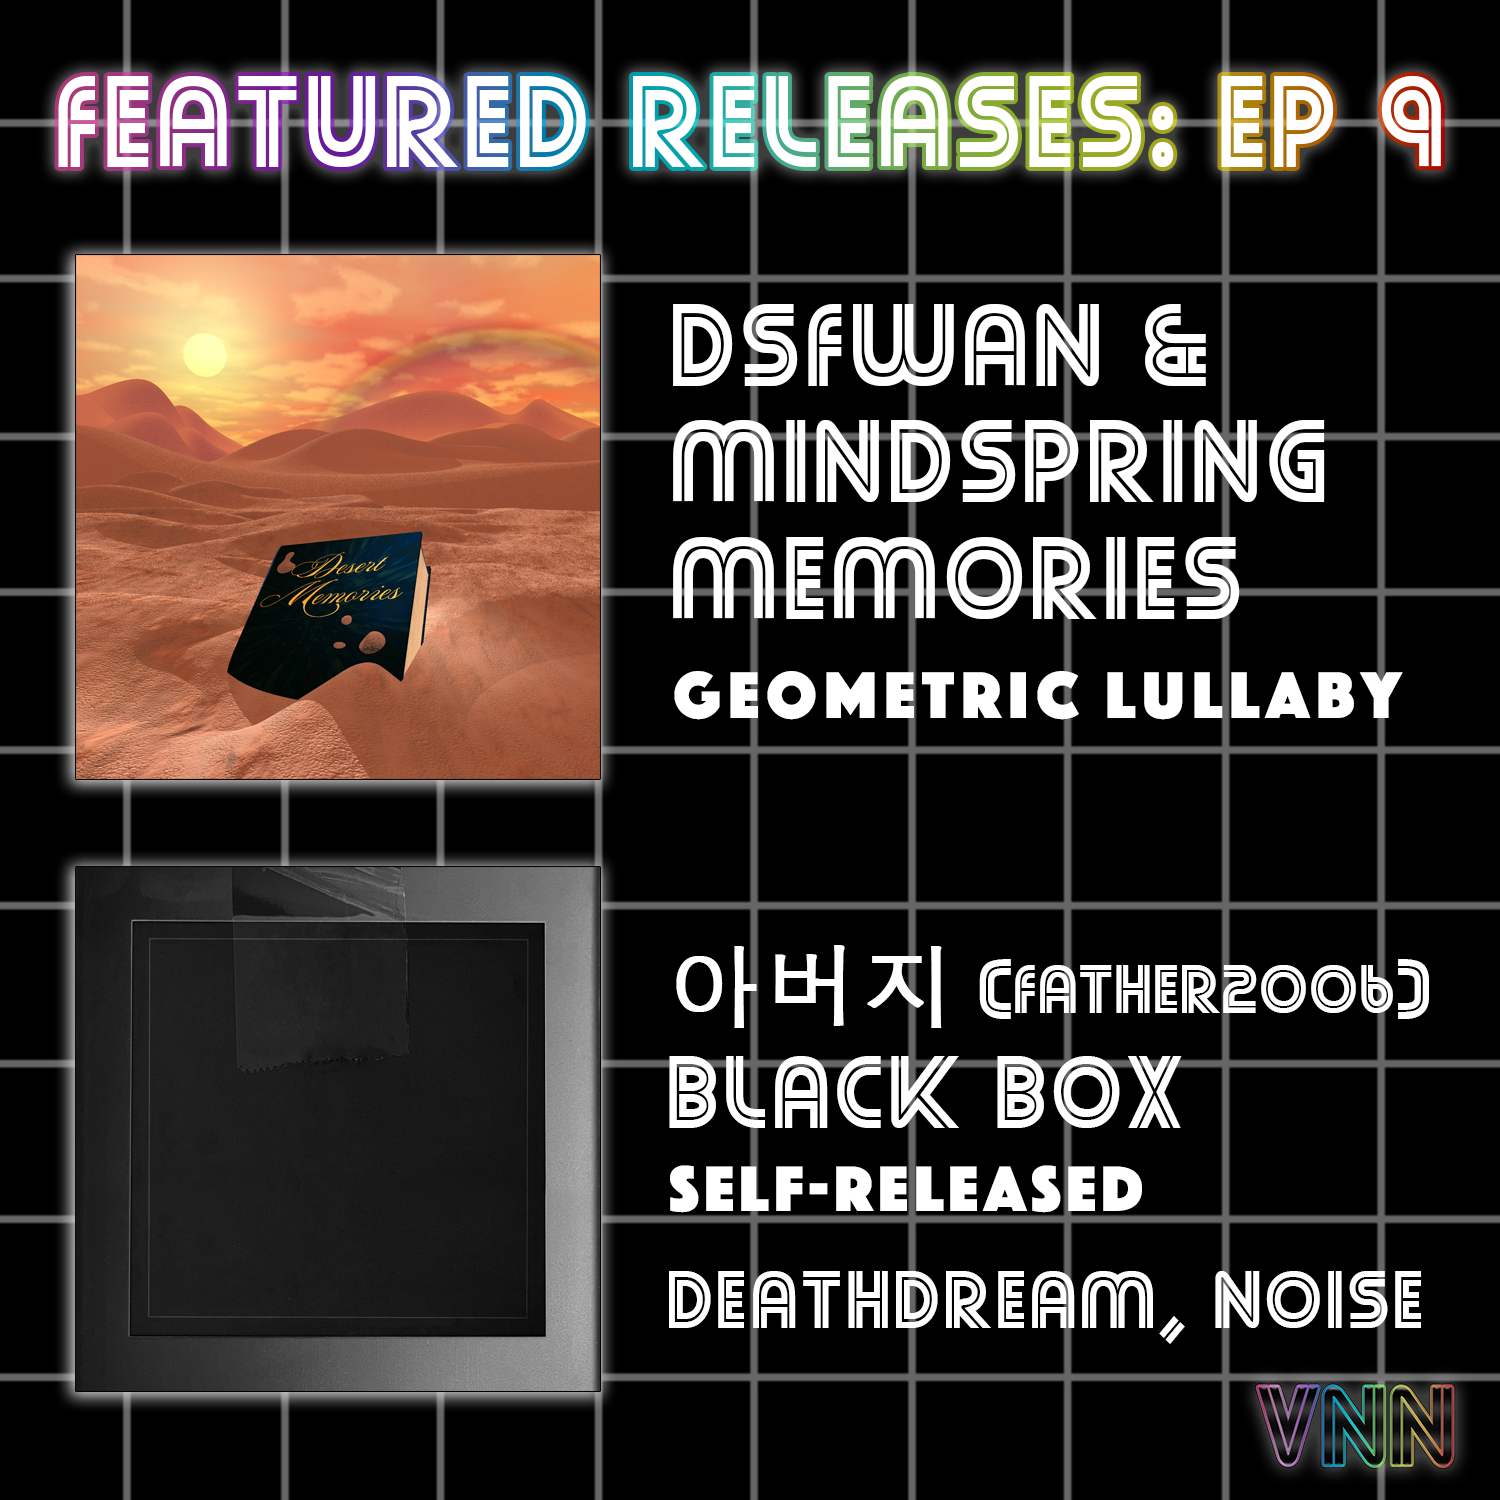 Featured Releases: desert sand feels warm at night/Mindspring Memories - Desert Memories & father2006 - black box (Ep. 9)